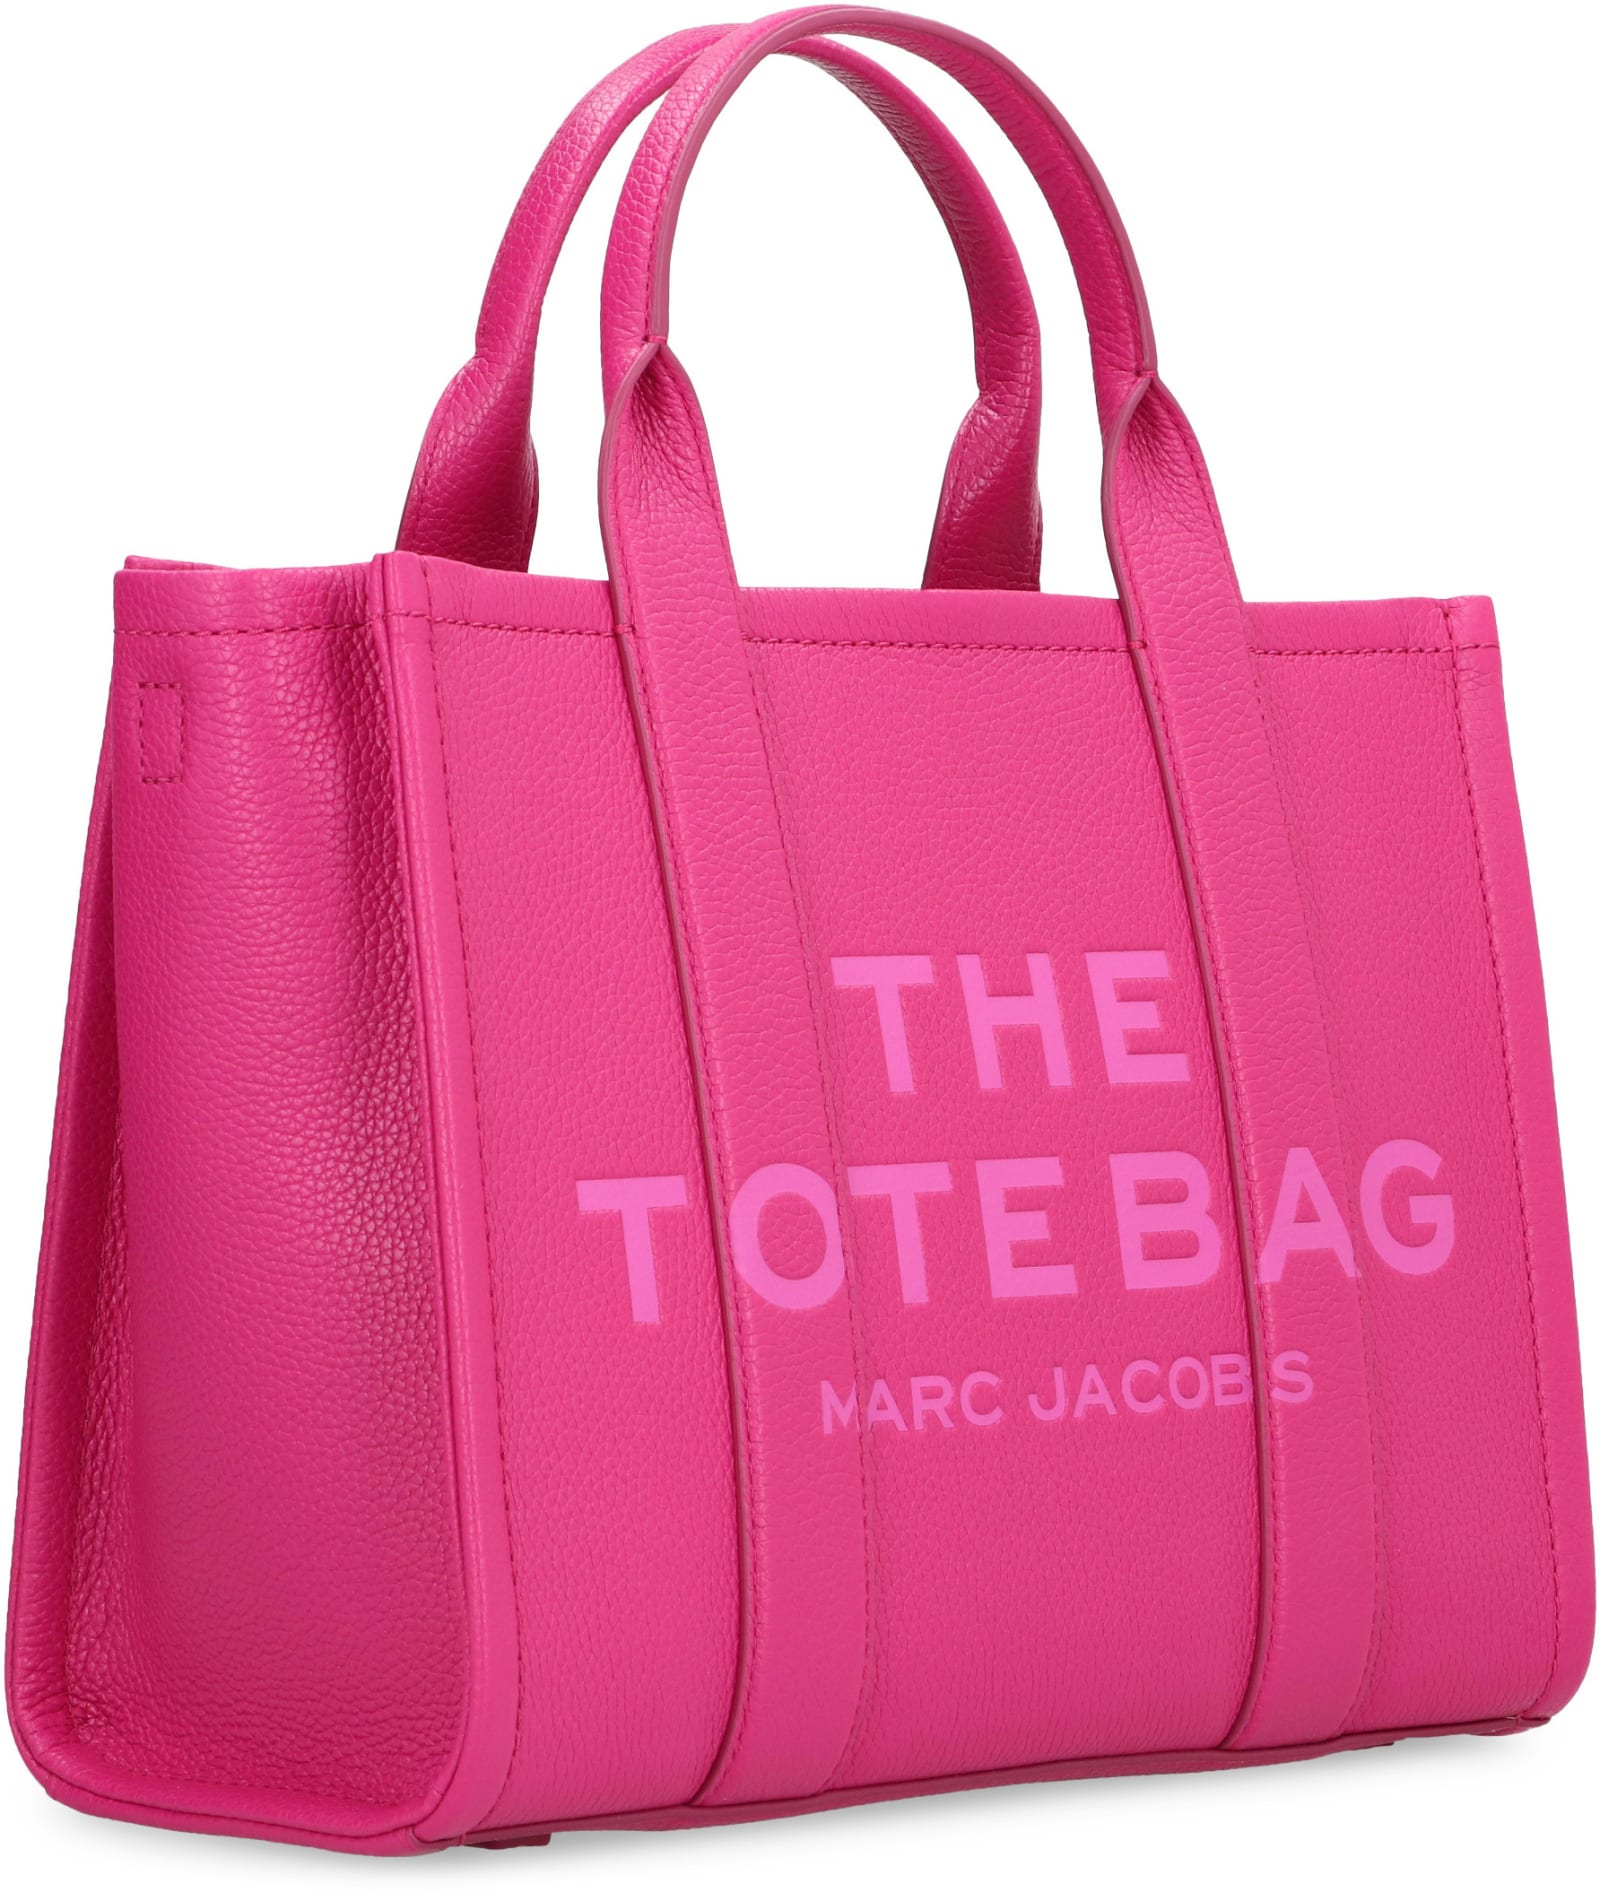 Shop Marc Jacobs The Tote Bag Leather Bag In Lipstick Pink